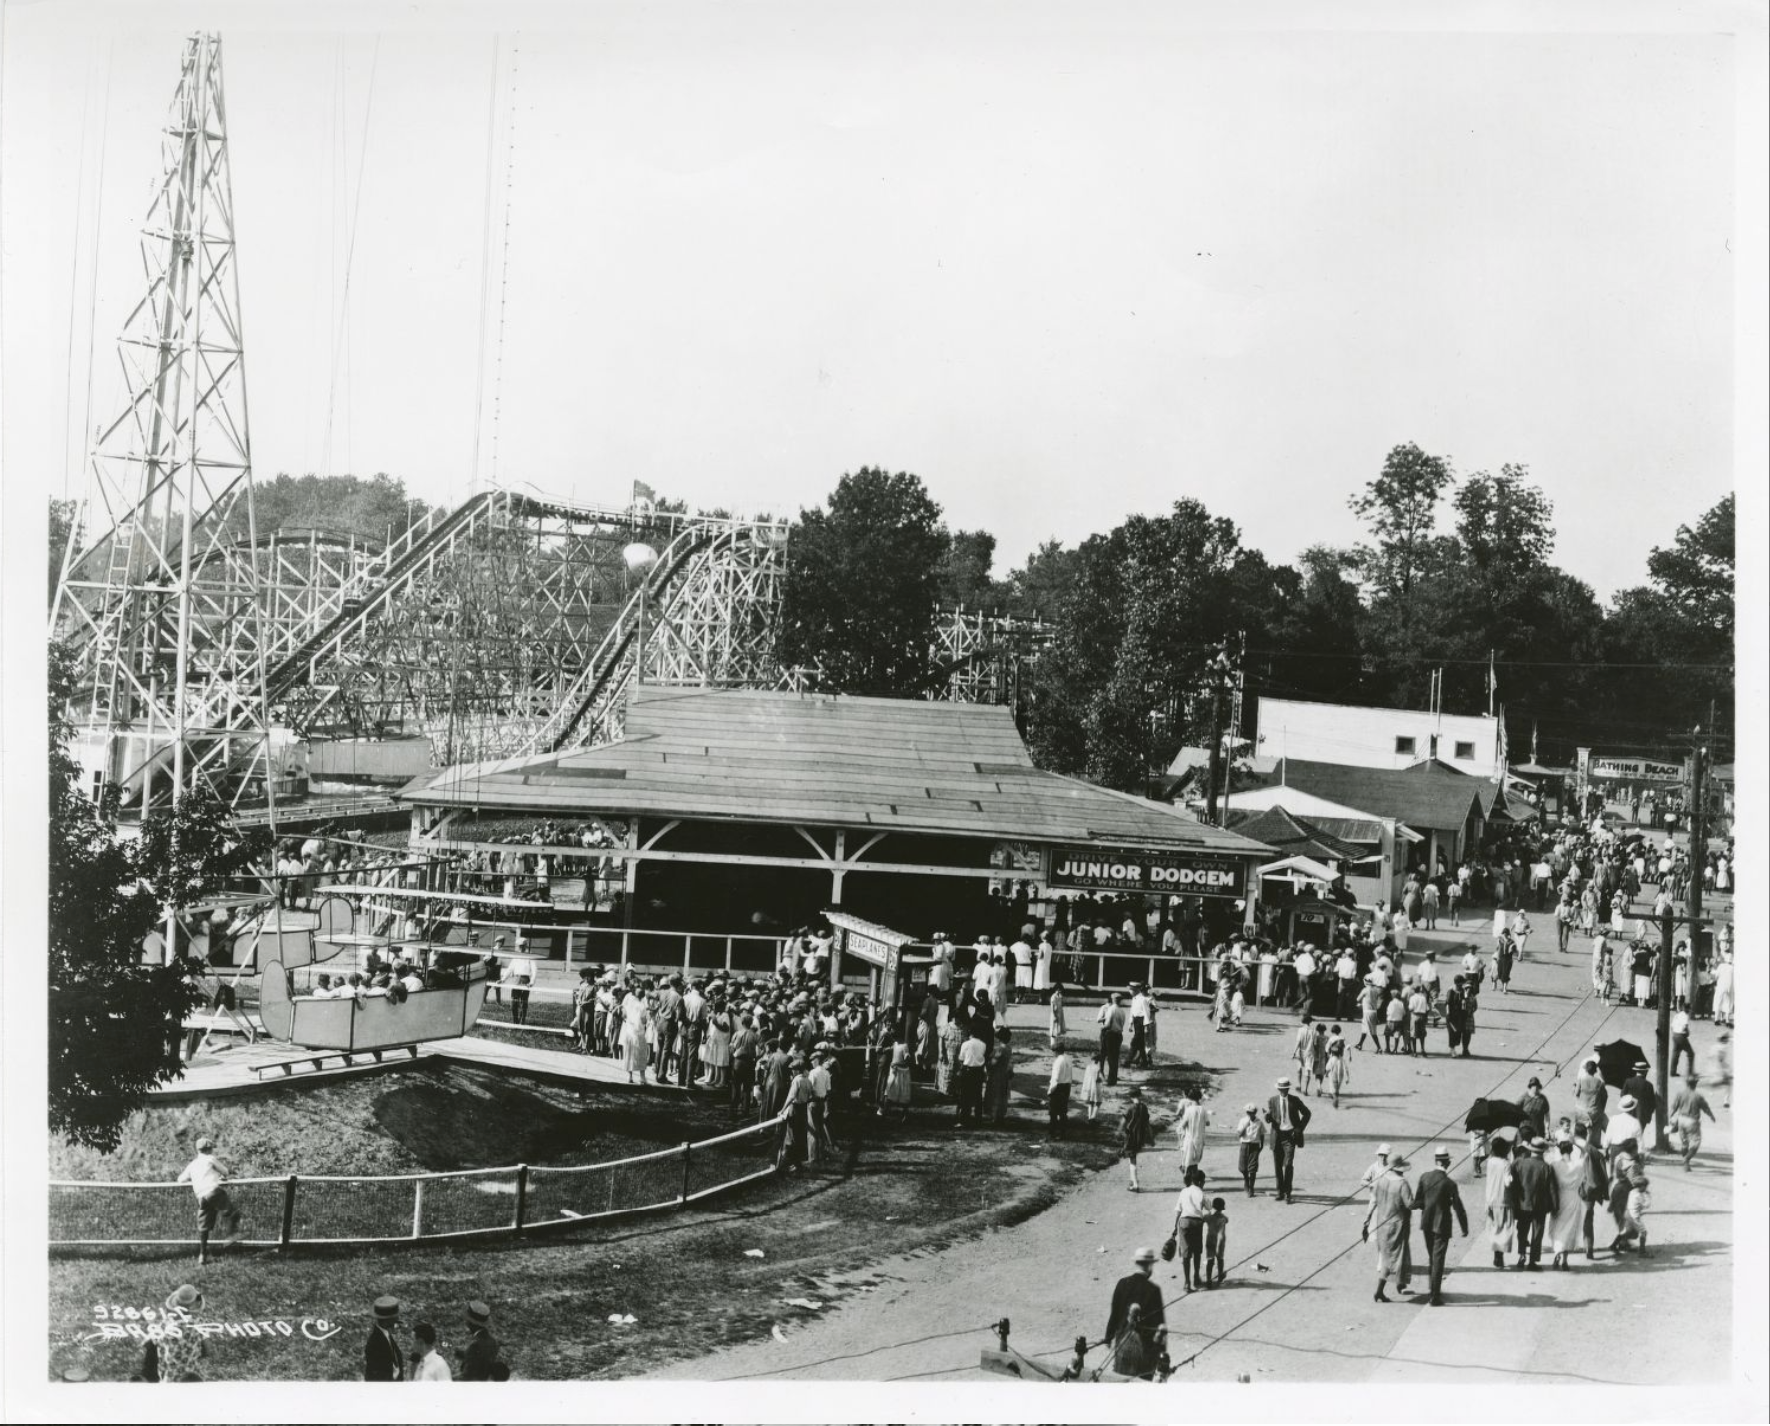 A view of many people on the grounds of an amusement park. A low covered building in the center has a sign for "Junior Dodgem". There is a large roller coaster in the background.